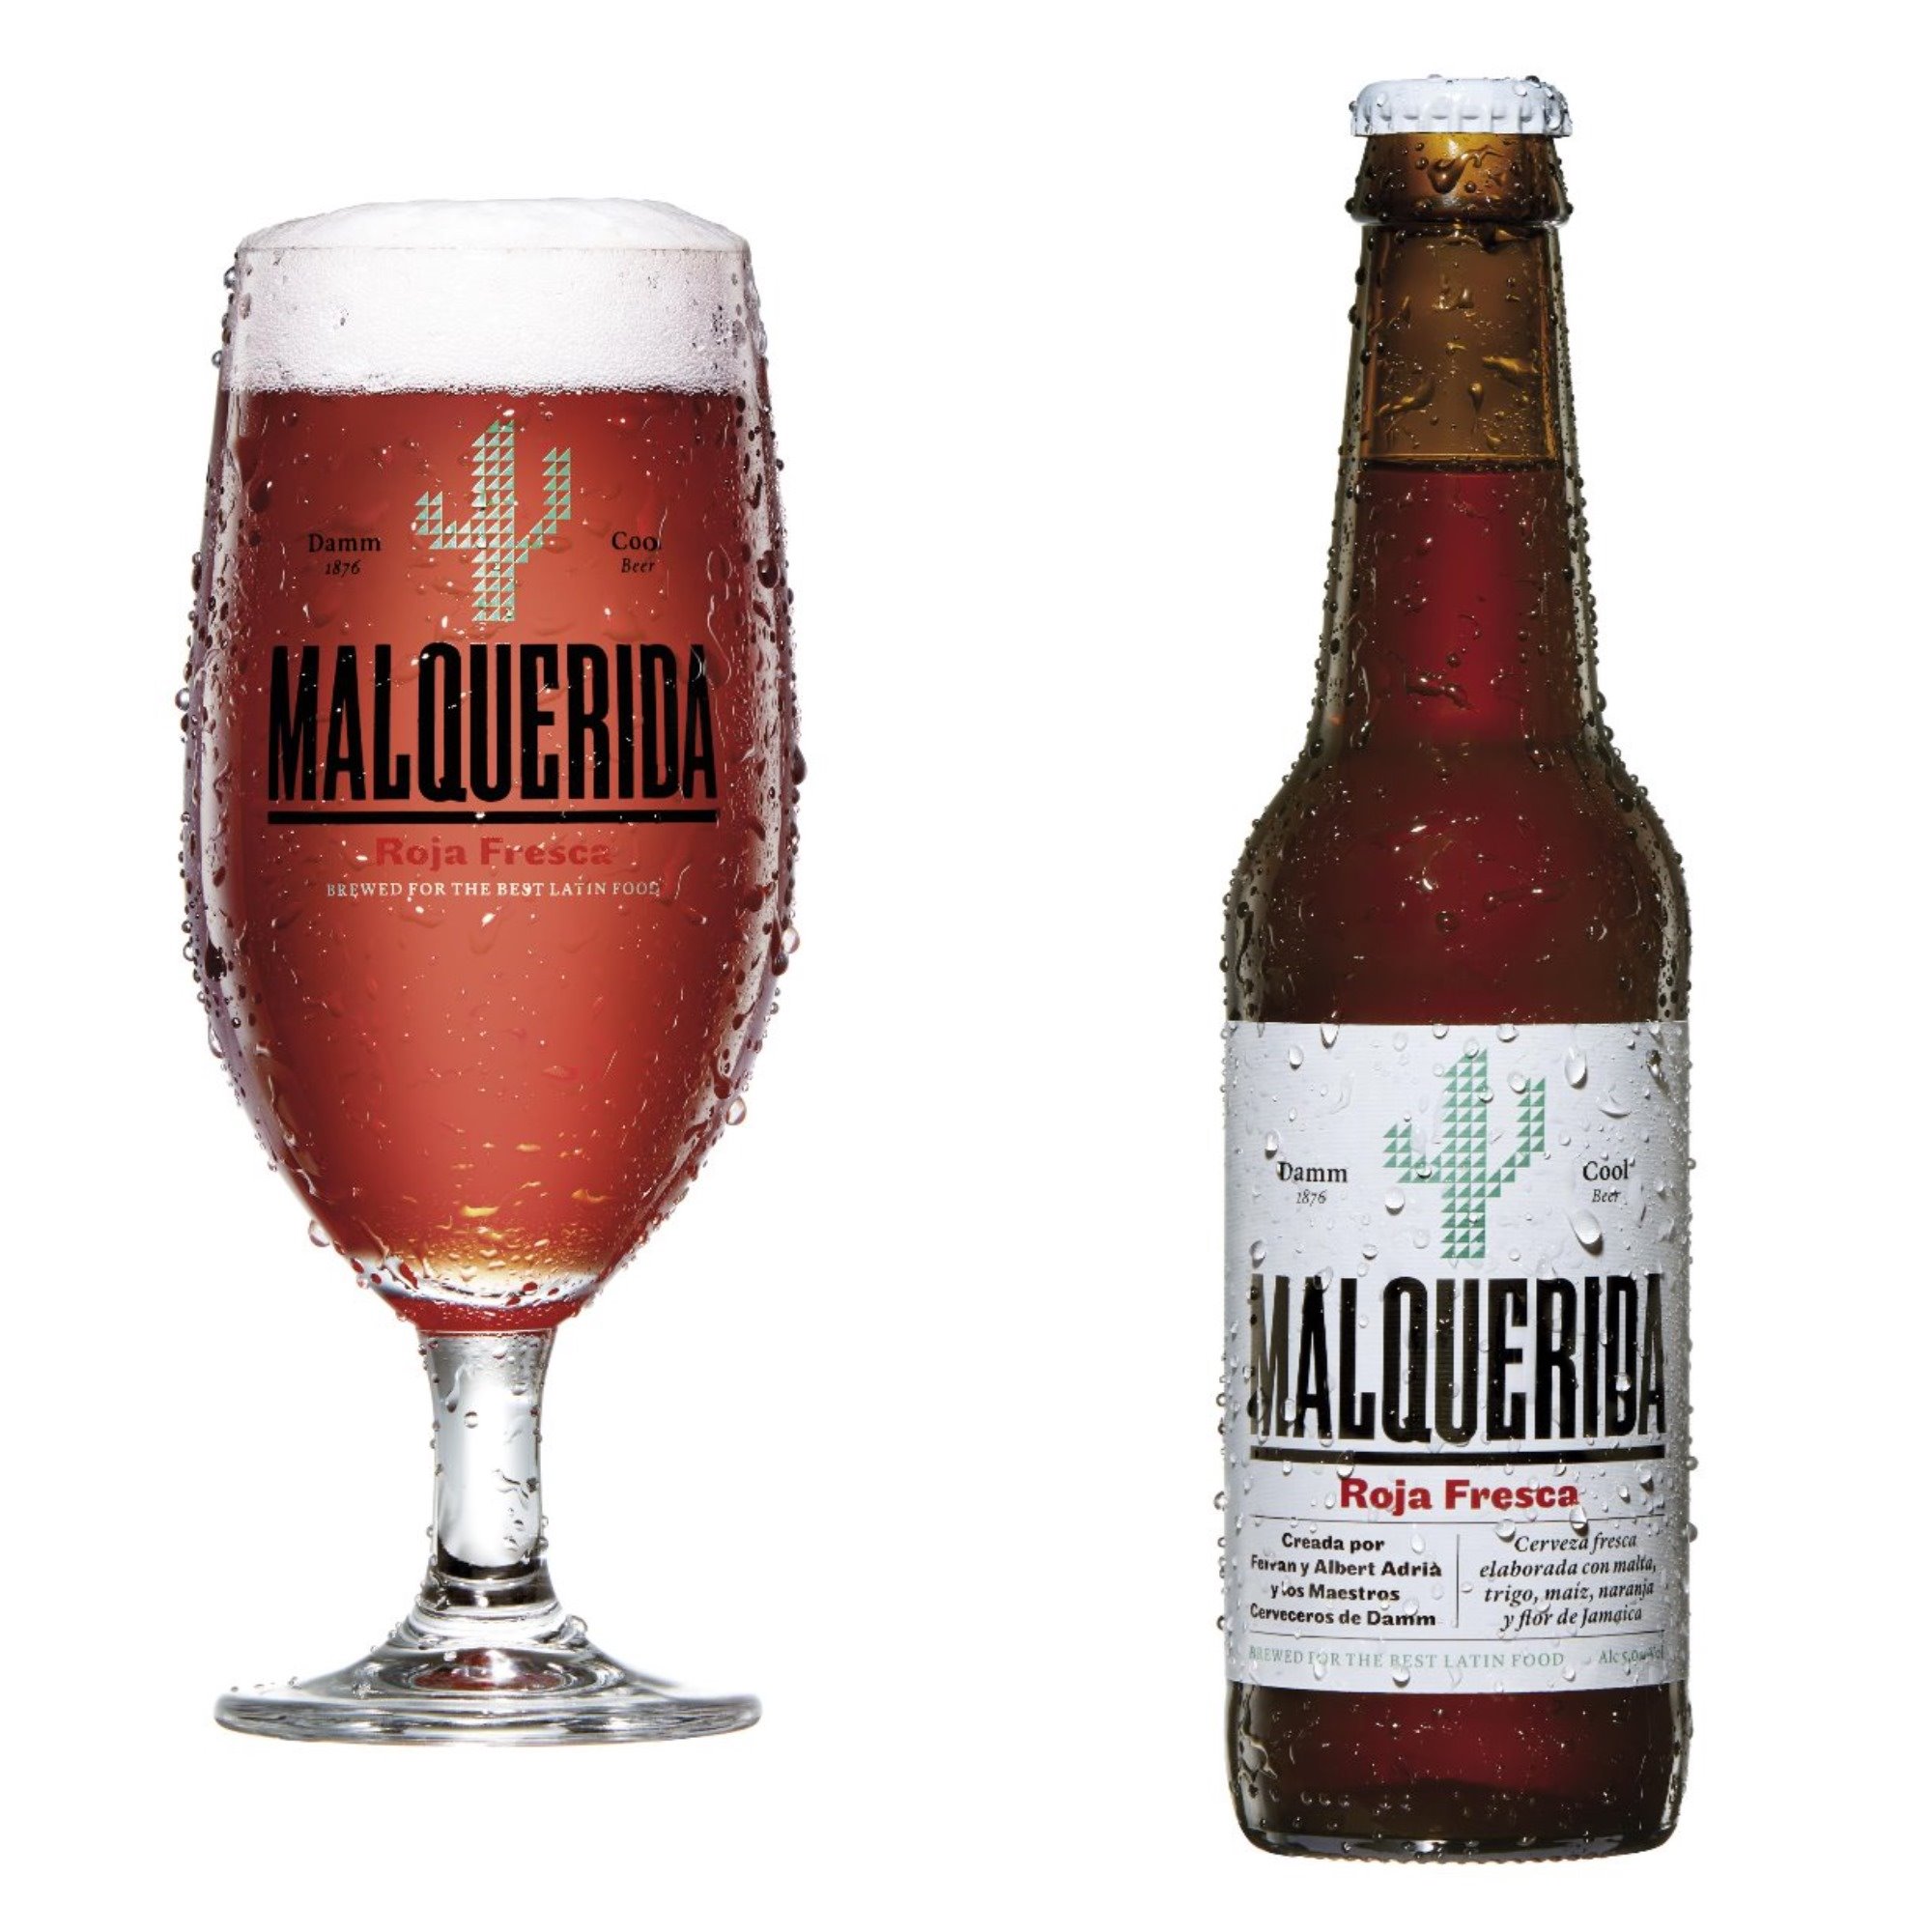 Malquerida beer, produced by Damm, with a little help from the world's greatest culinary genuises